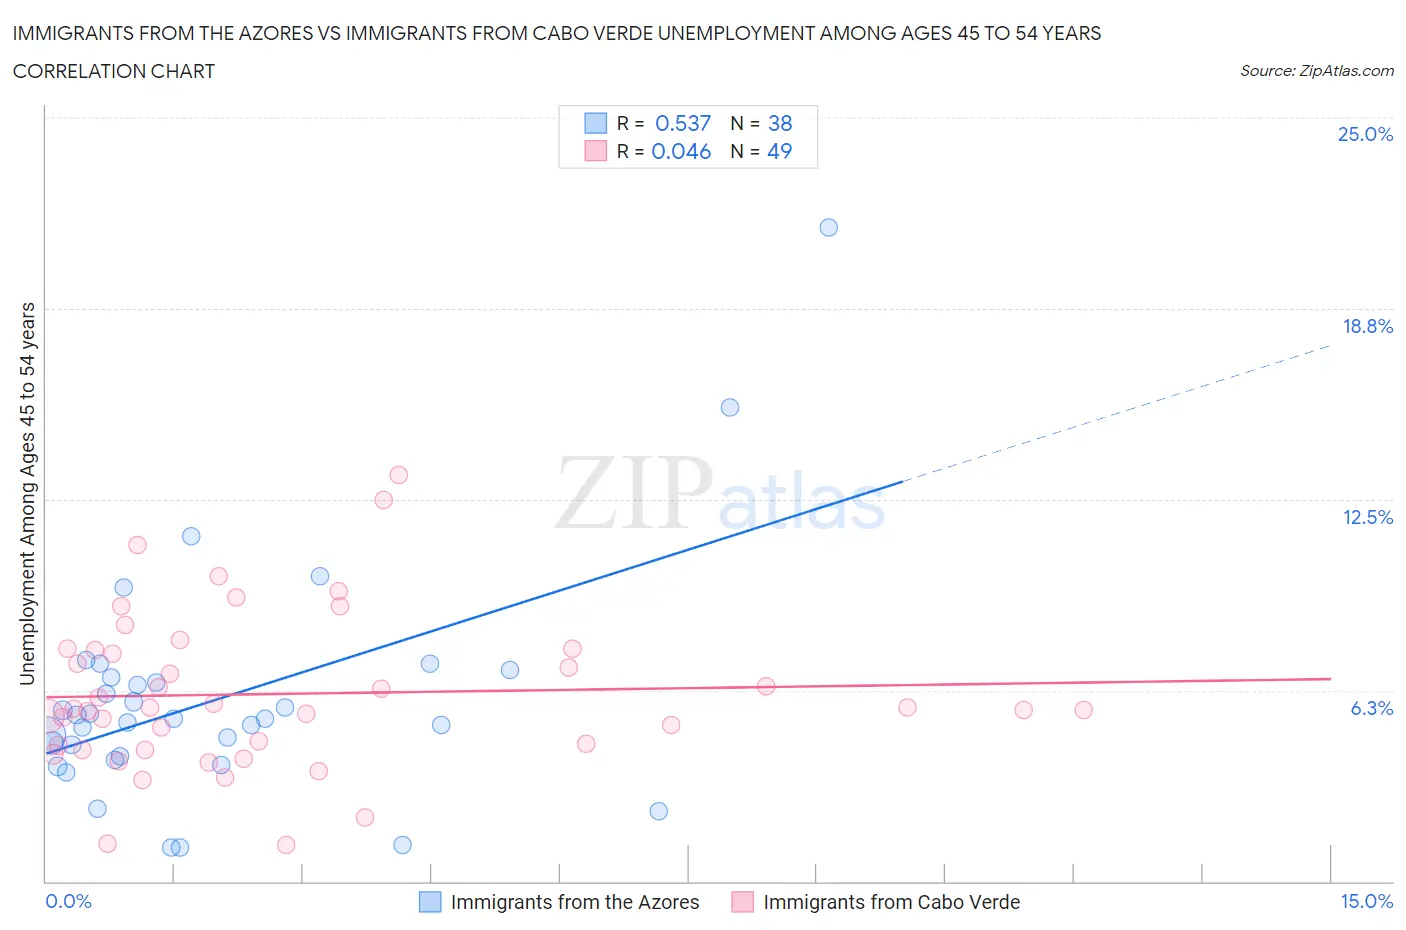 Immigrants from the Azores vs Immigrants from Cabo Verde Unemployment Among Ages 45 to 54 years